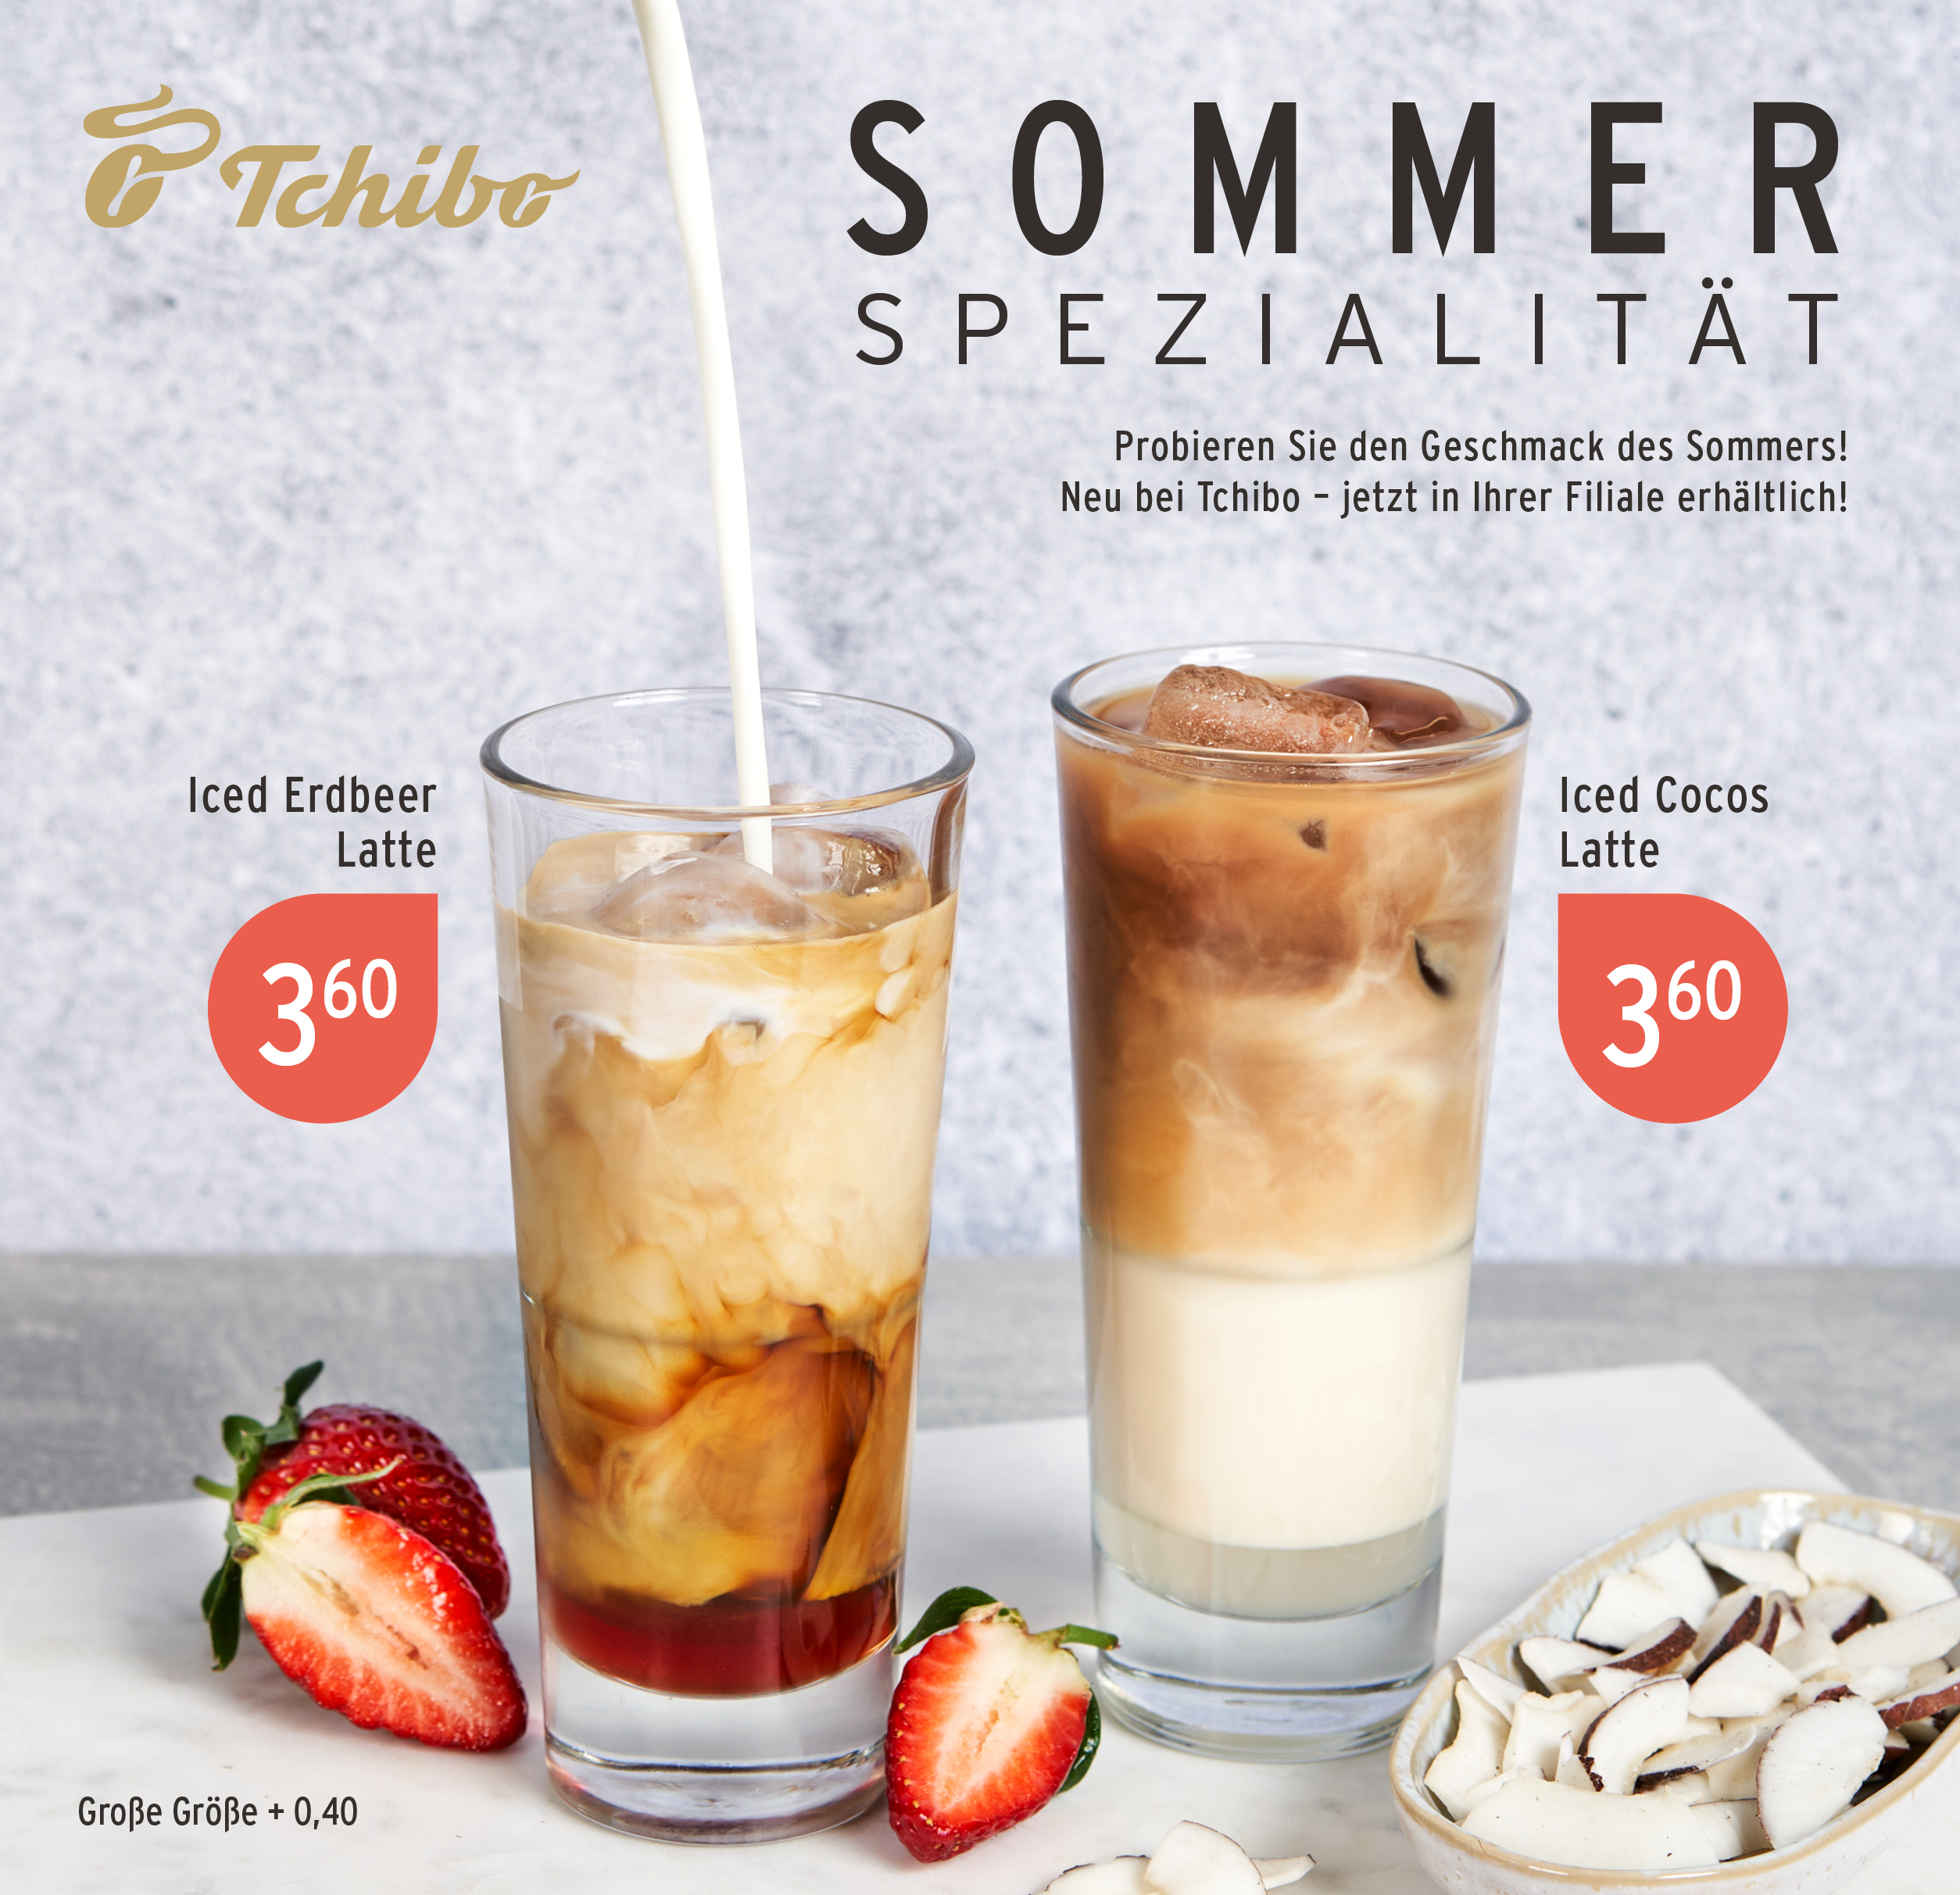 Tchibo: Summer specialty 4